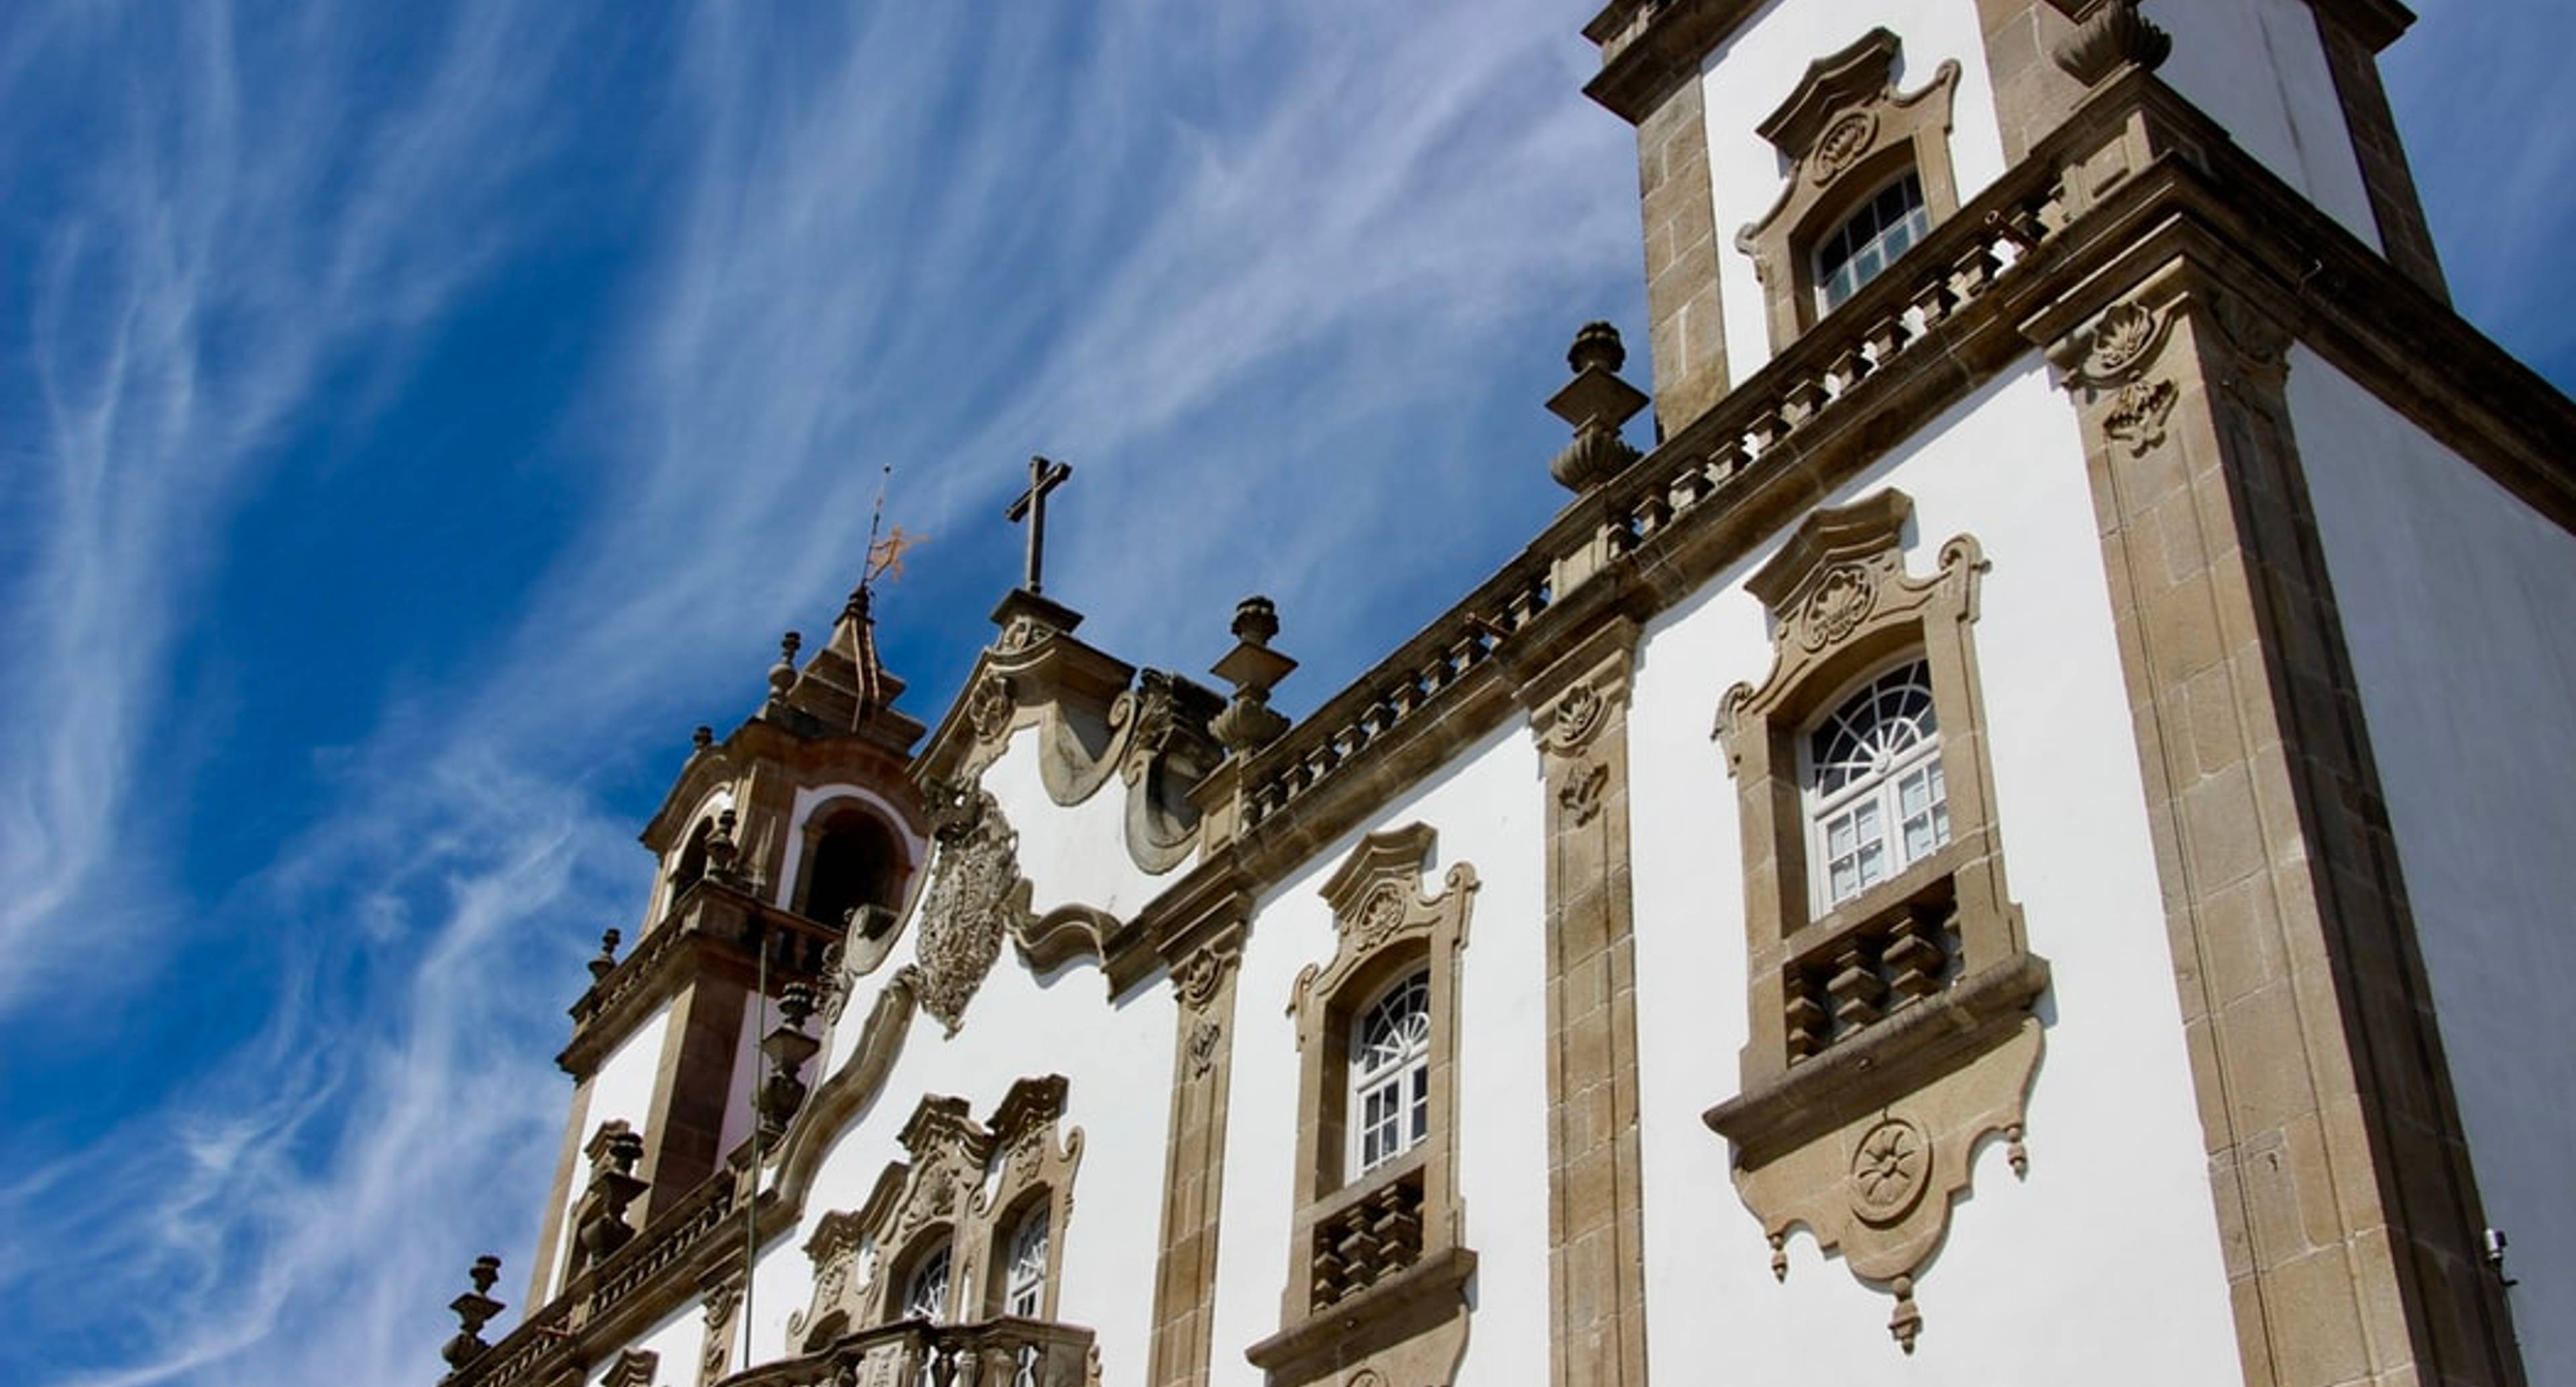 The charm of old Viseu